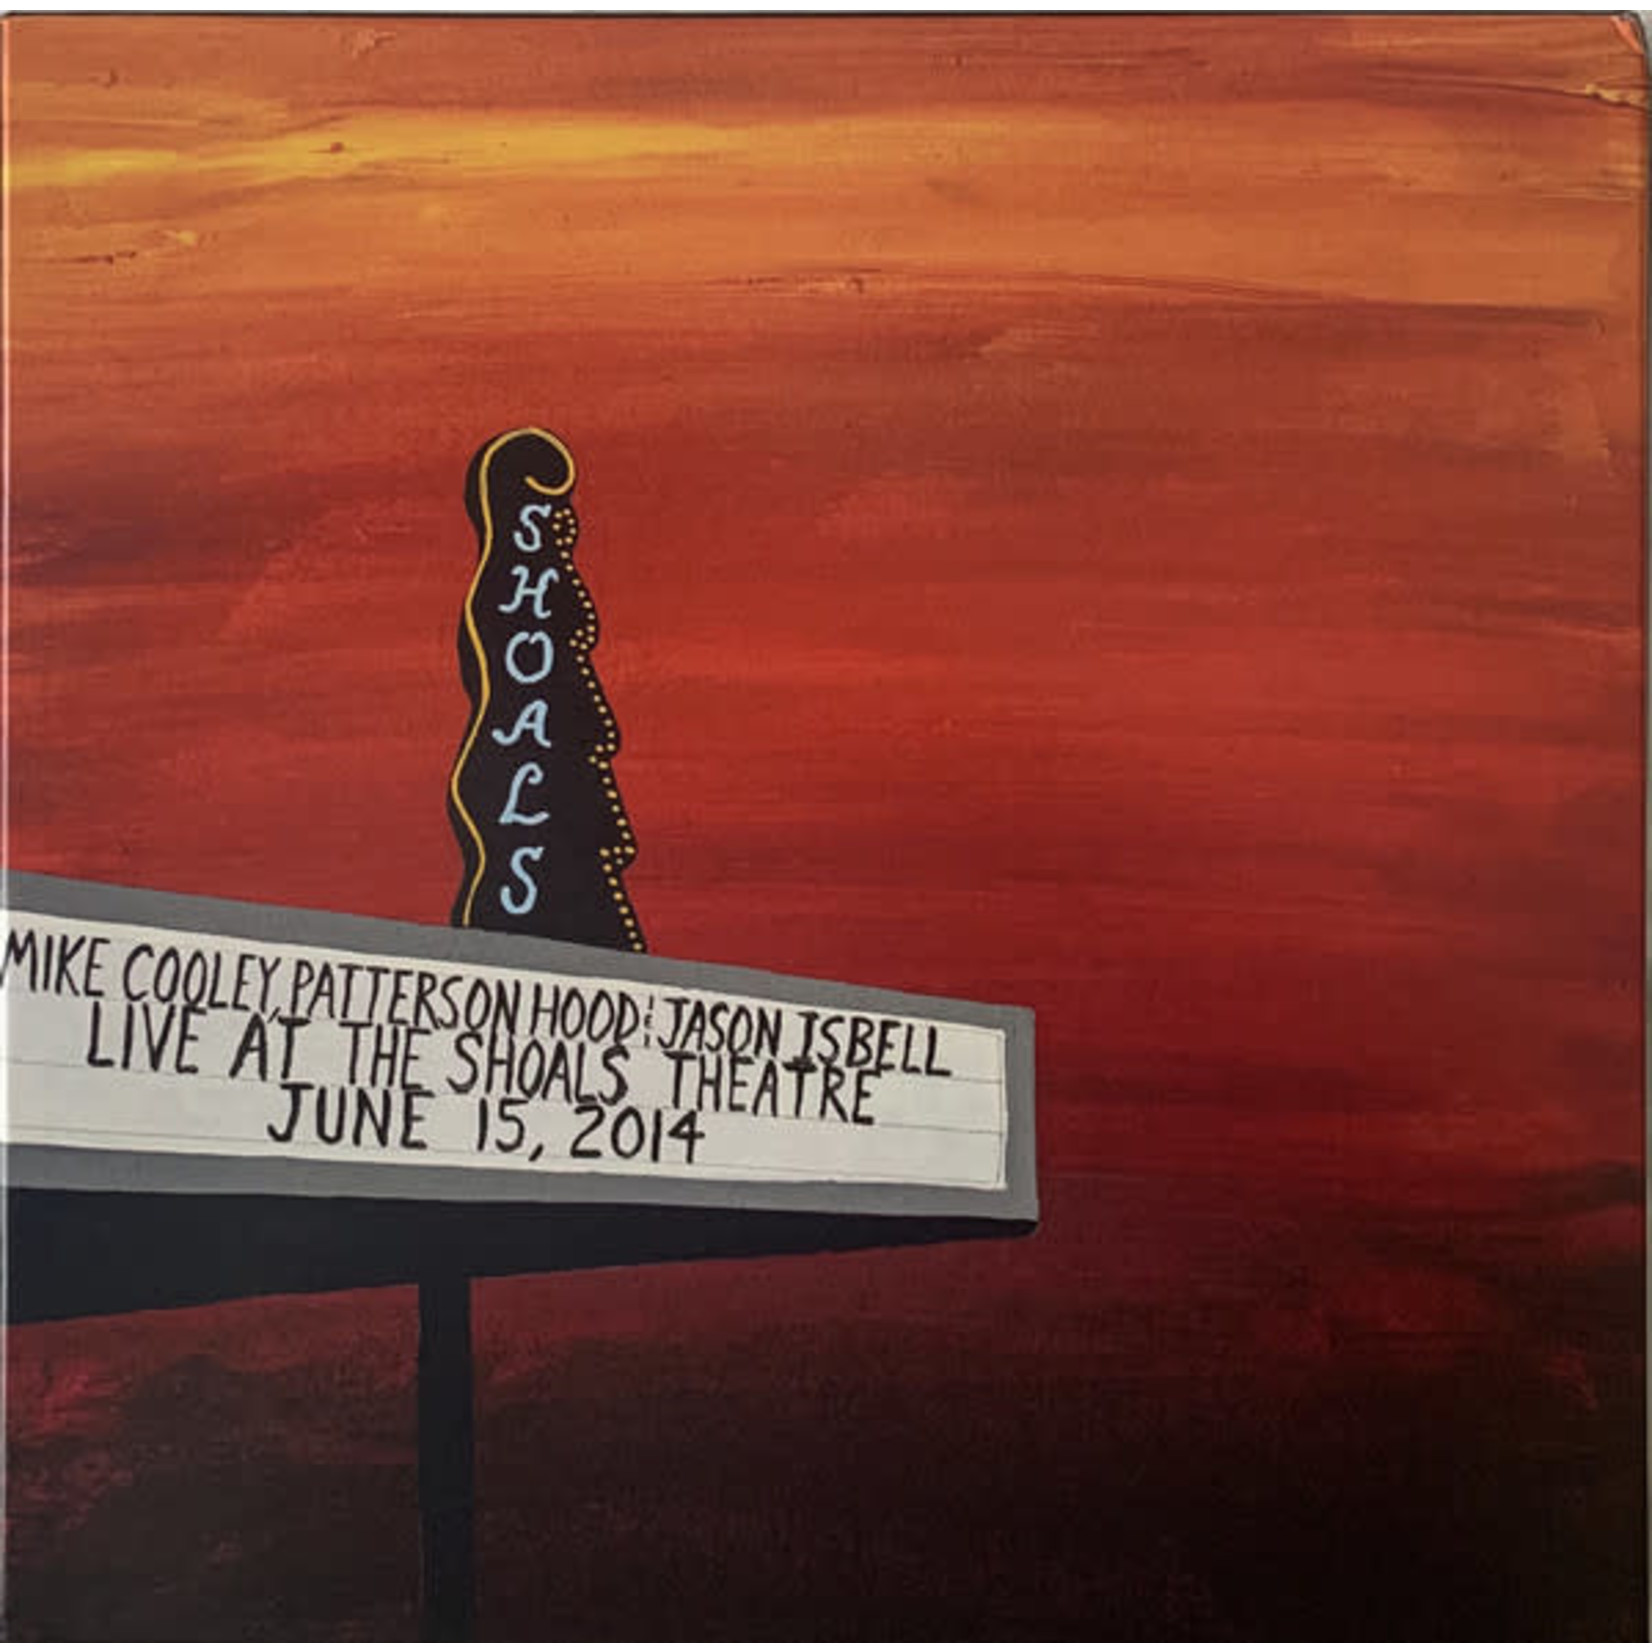 Southeastern Mike Cooley, Patterson Hood, Jason Isbell - Live at the Shoals Theatre (4LP) [Blue/Red]